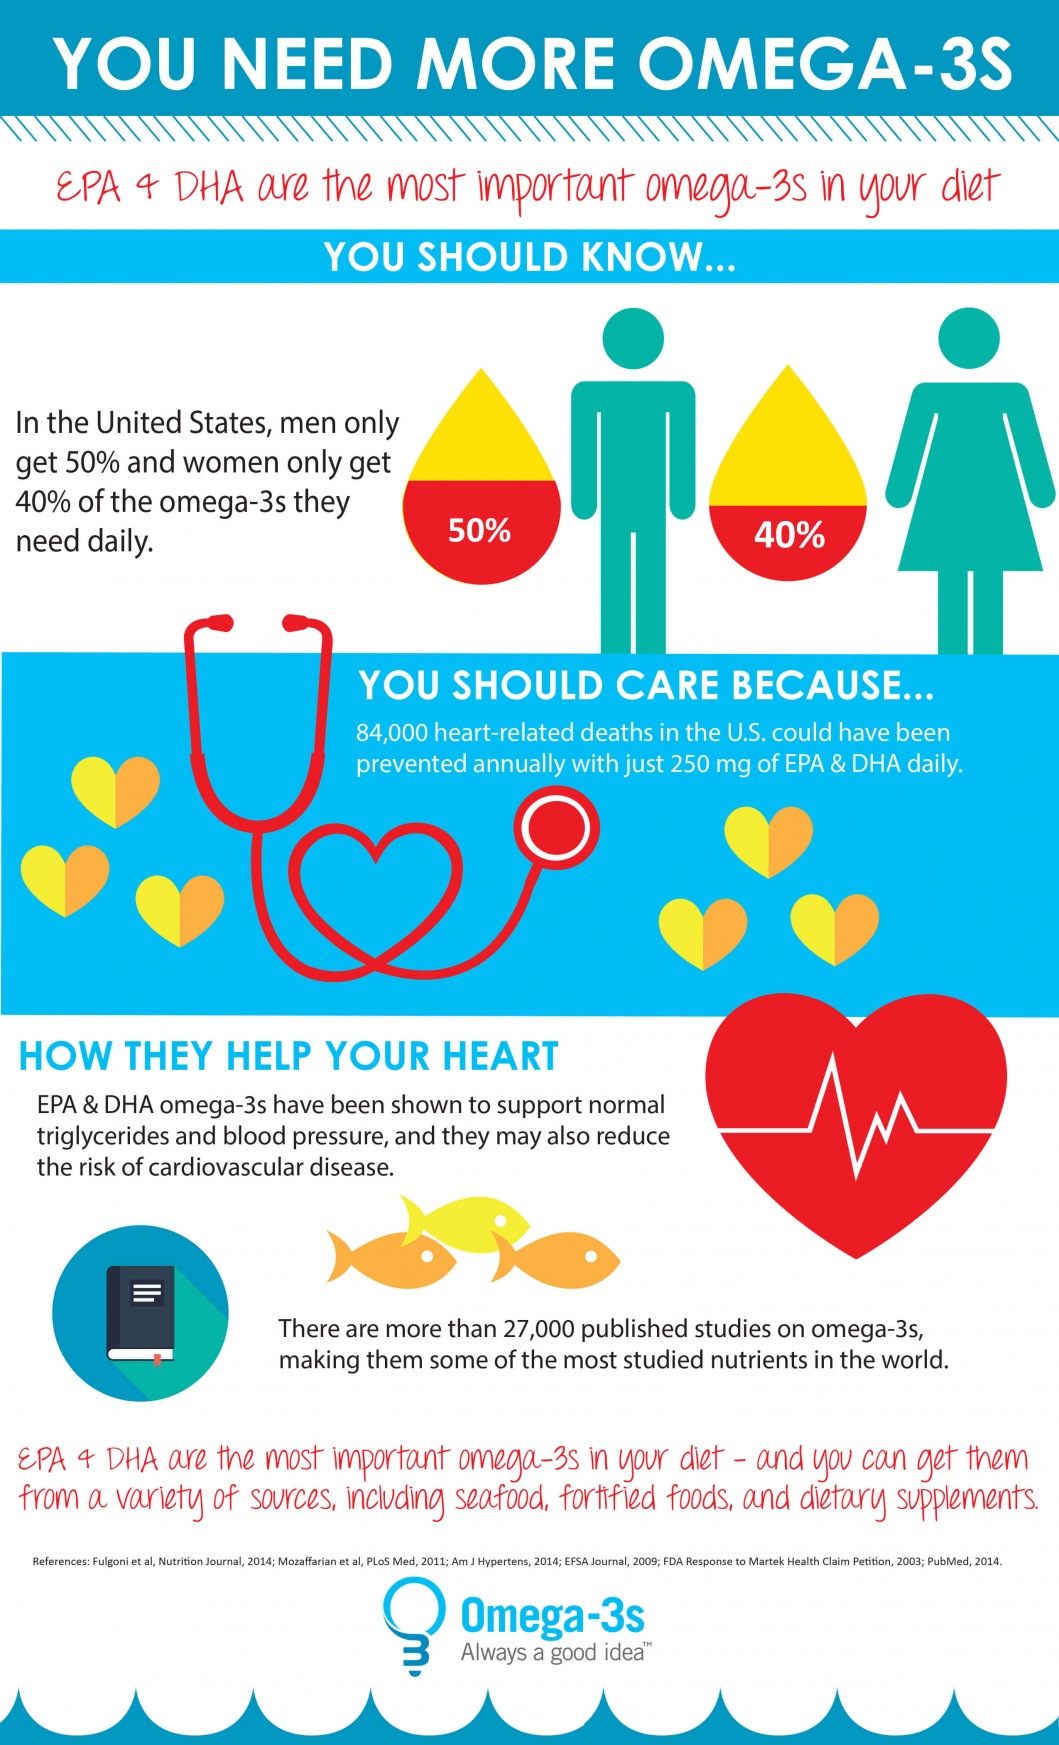 Omega-3s and Heart Health